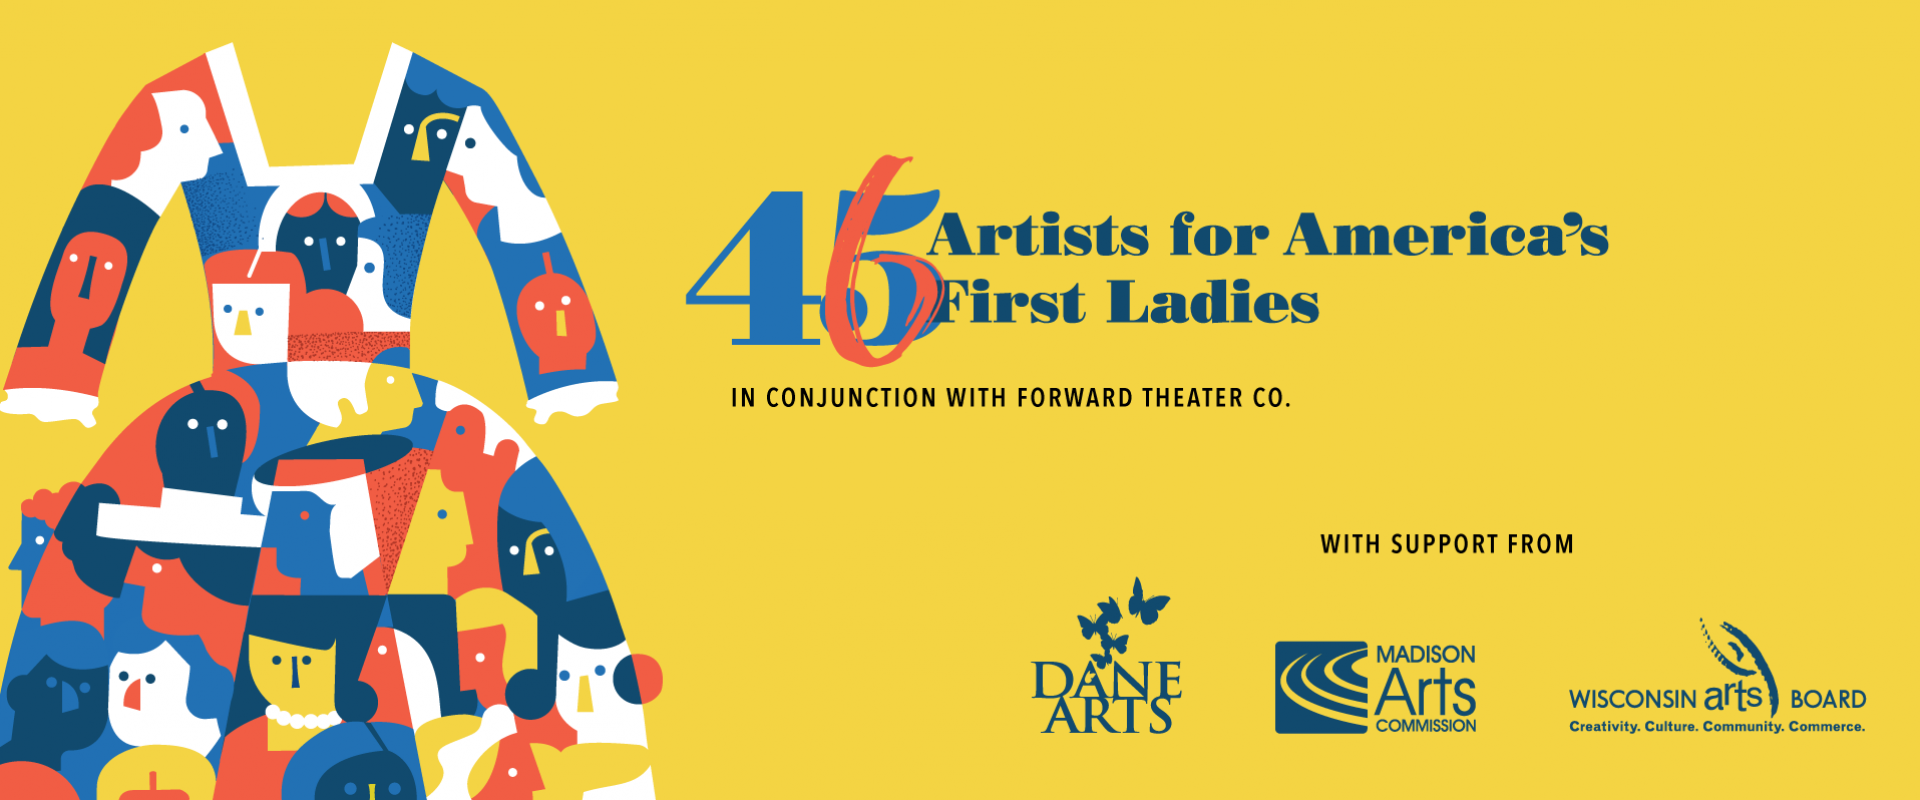 46 Artists for America's First Ladies